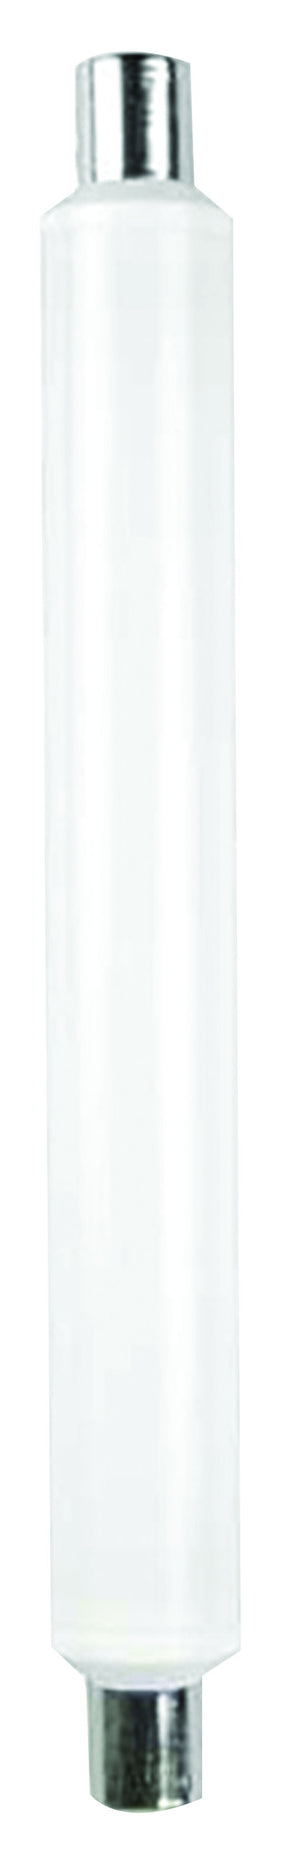 997106 - Tube Linolite LED S19 309mm 6W 2700K 500Lm GS TUBE The Lampco - The Lamp Company